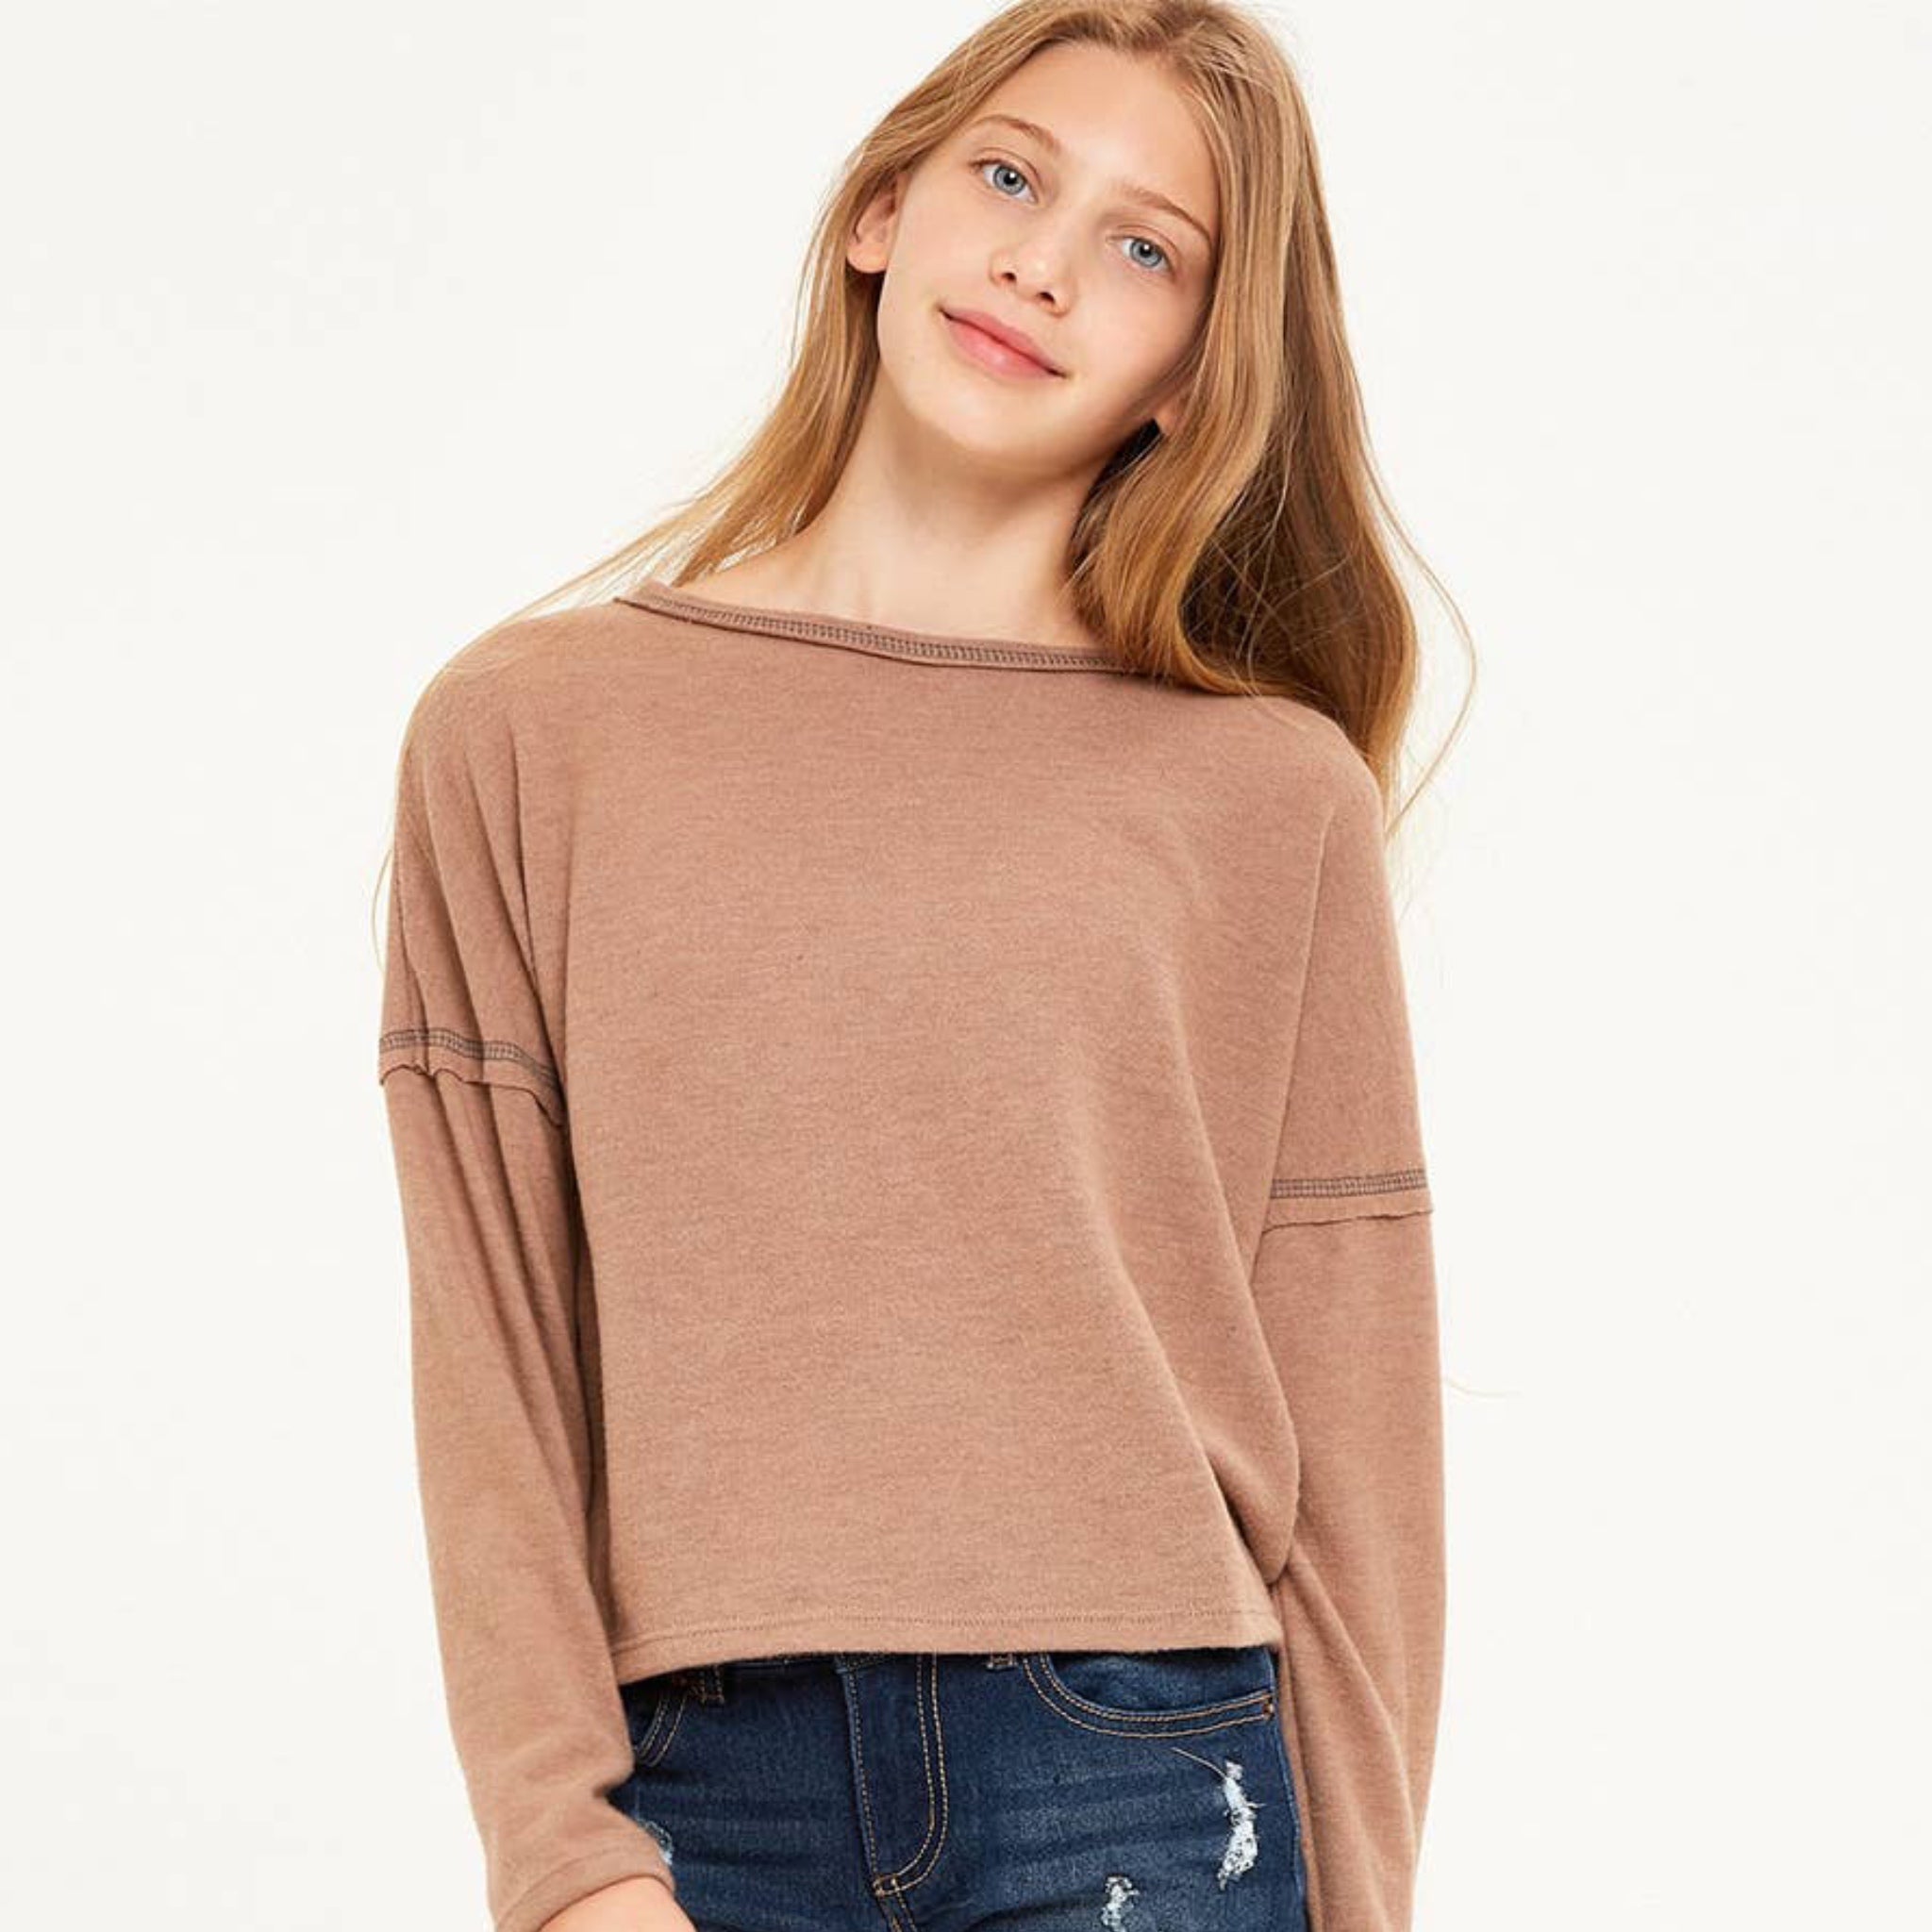 TWEEN MOCHA CONTRAST STITCHED BRUSHED KNIT TOP